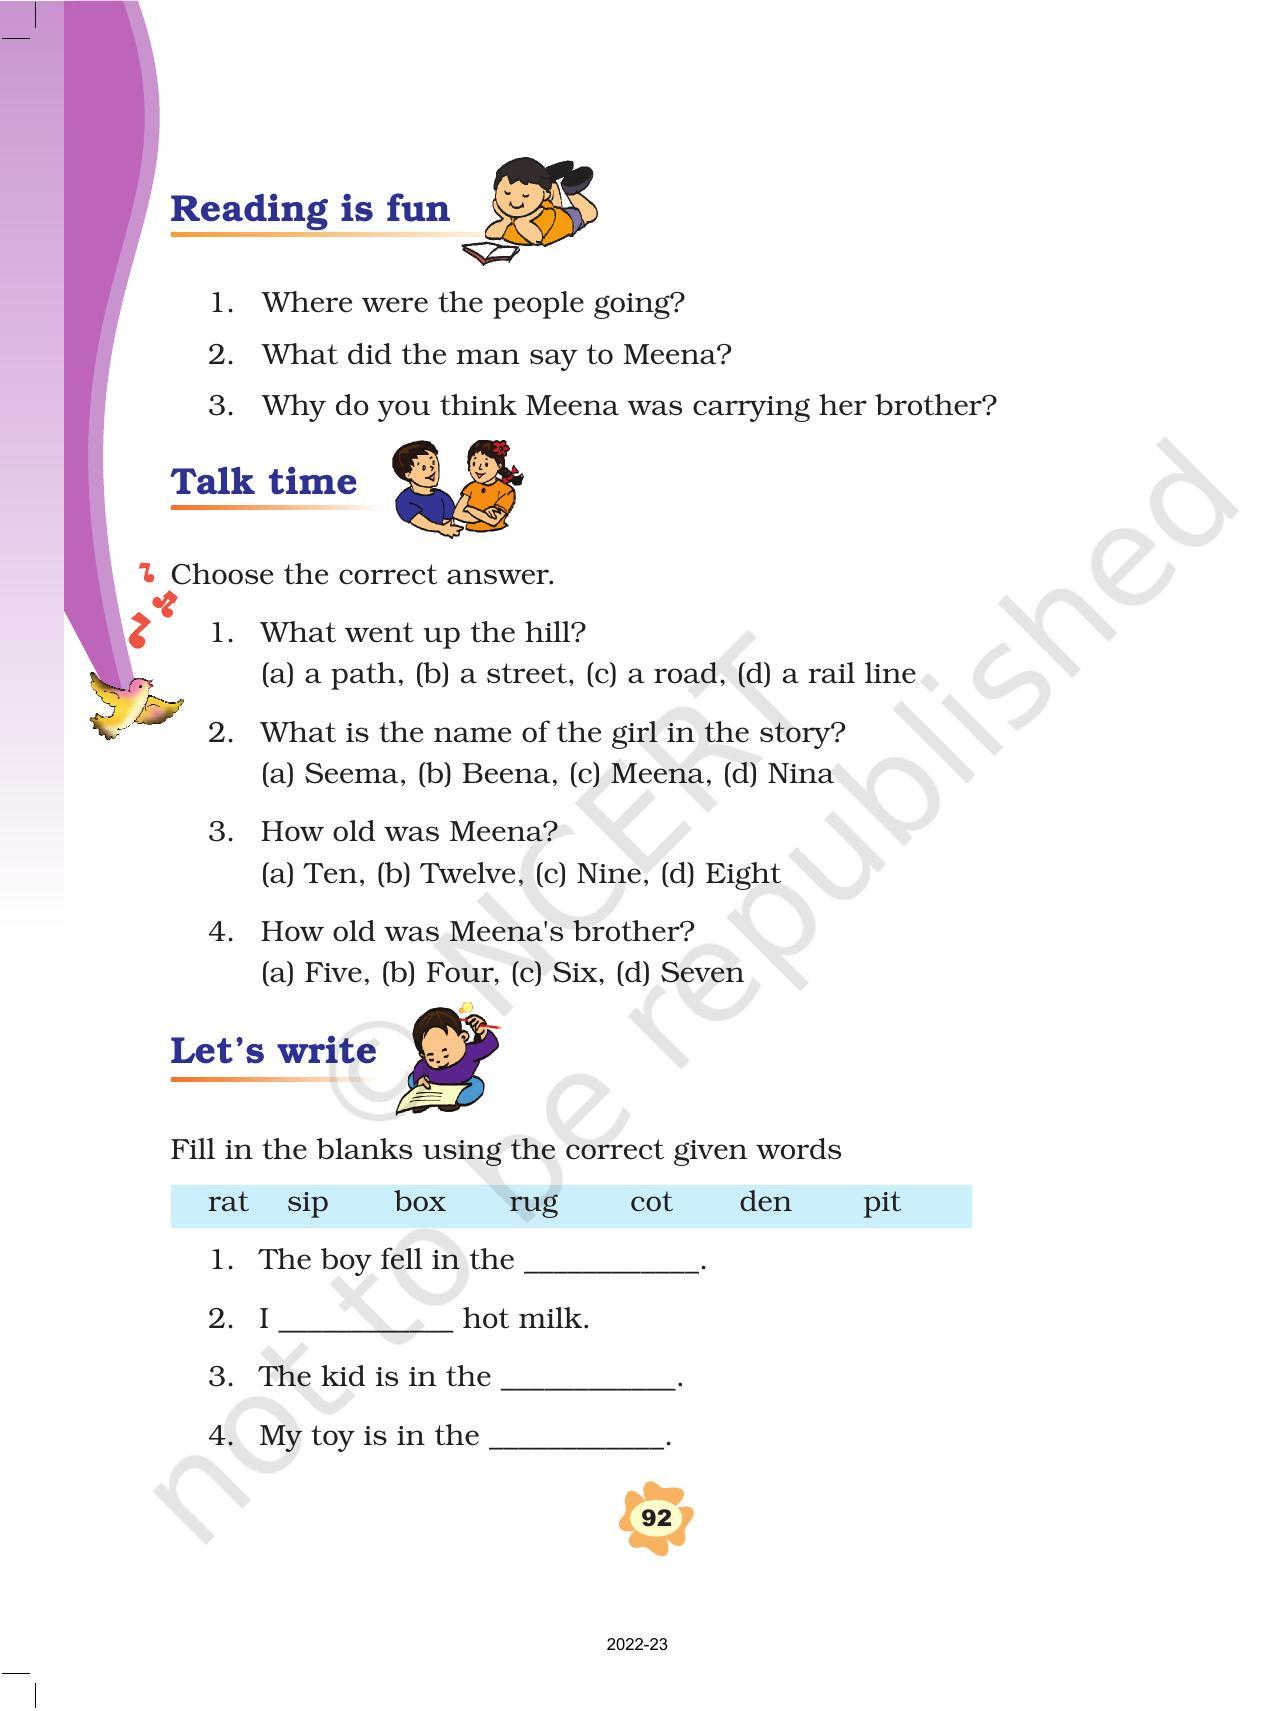 NCERT Book for Class 3 English: Unit IX.1-Don’t Tell  - Page 5